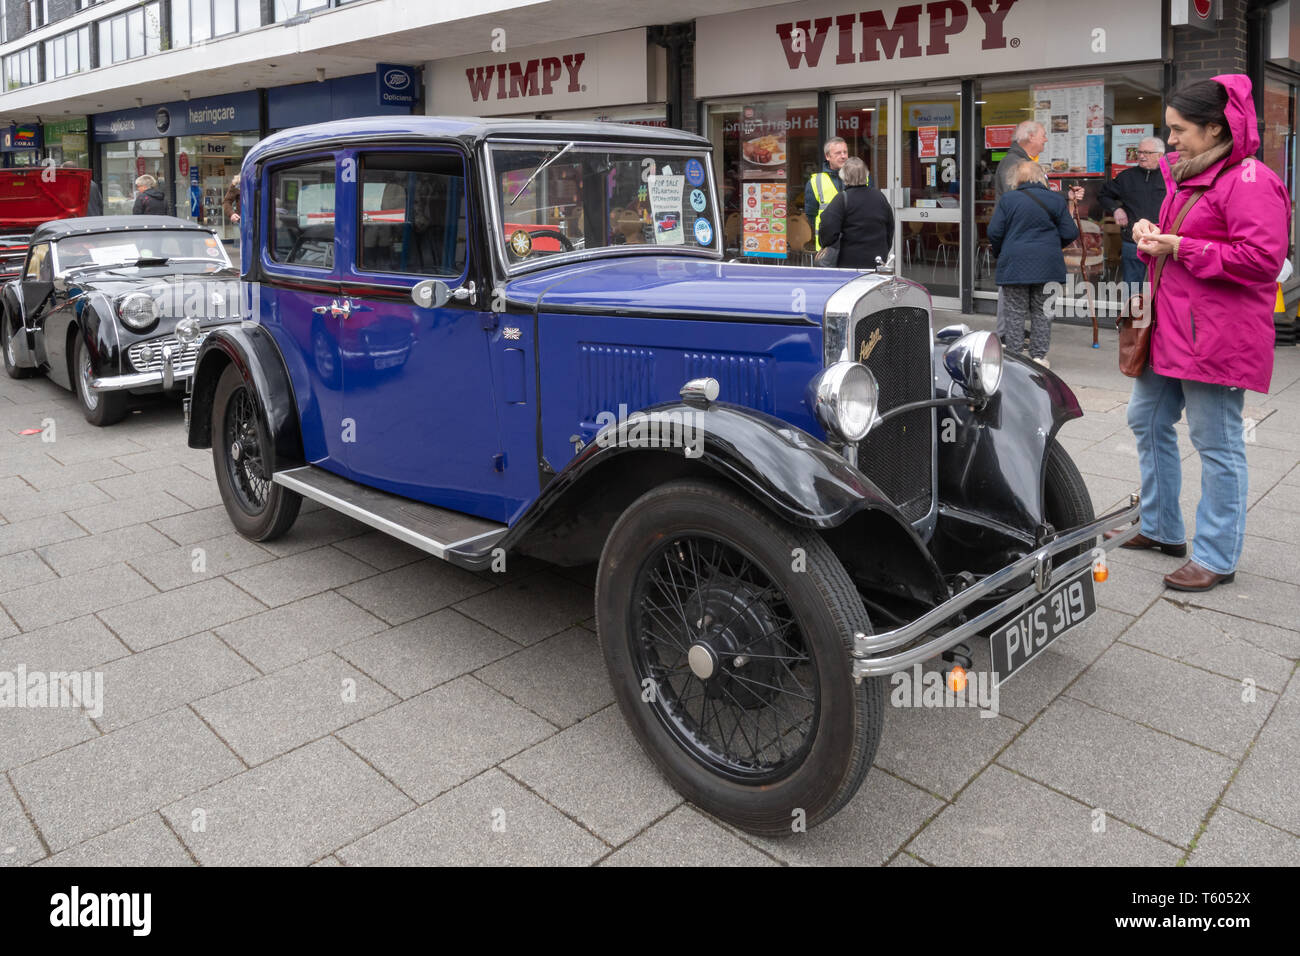 Blue 1932 Austin seven vintage car at a classic motor vehicle show in the UK Stock Photo